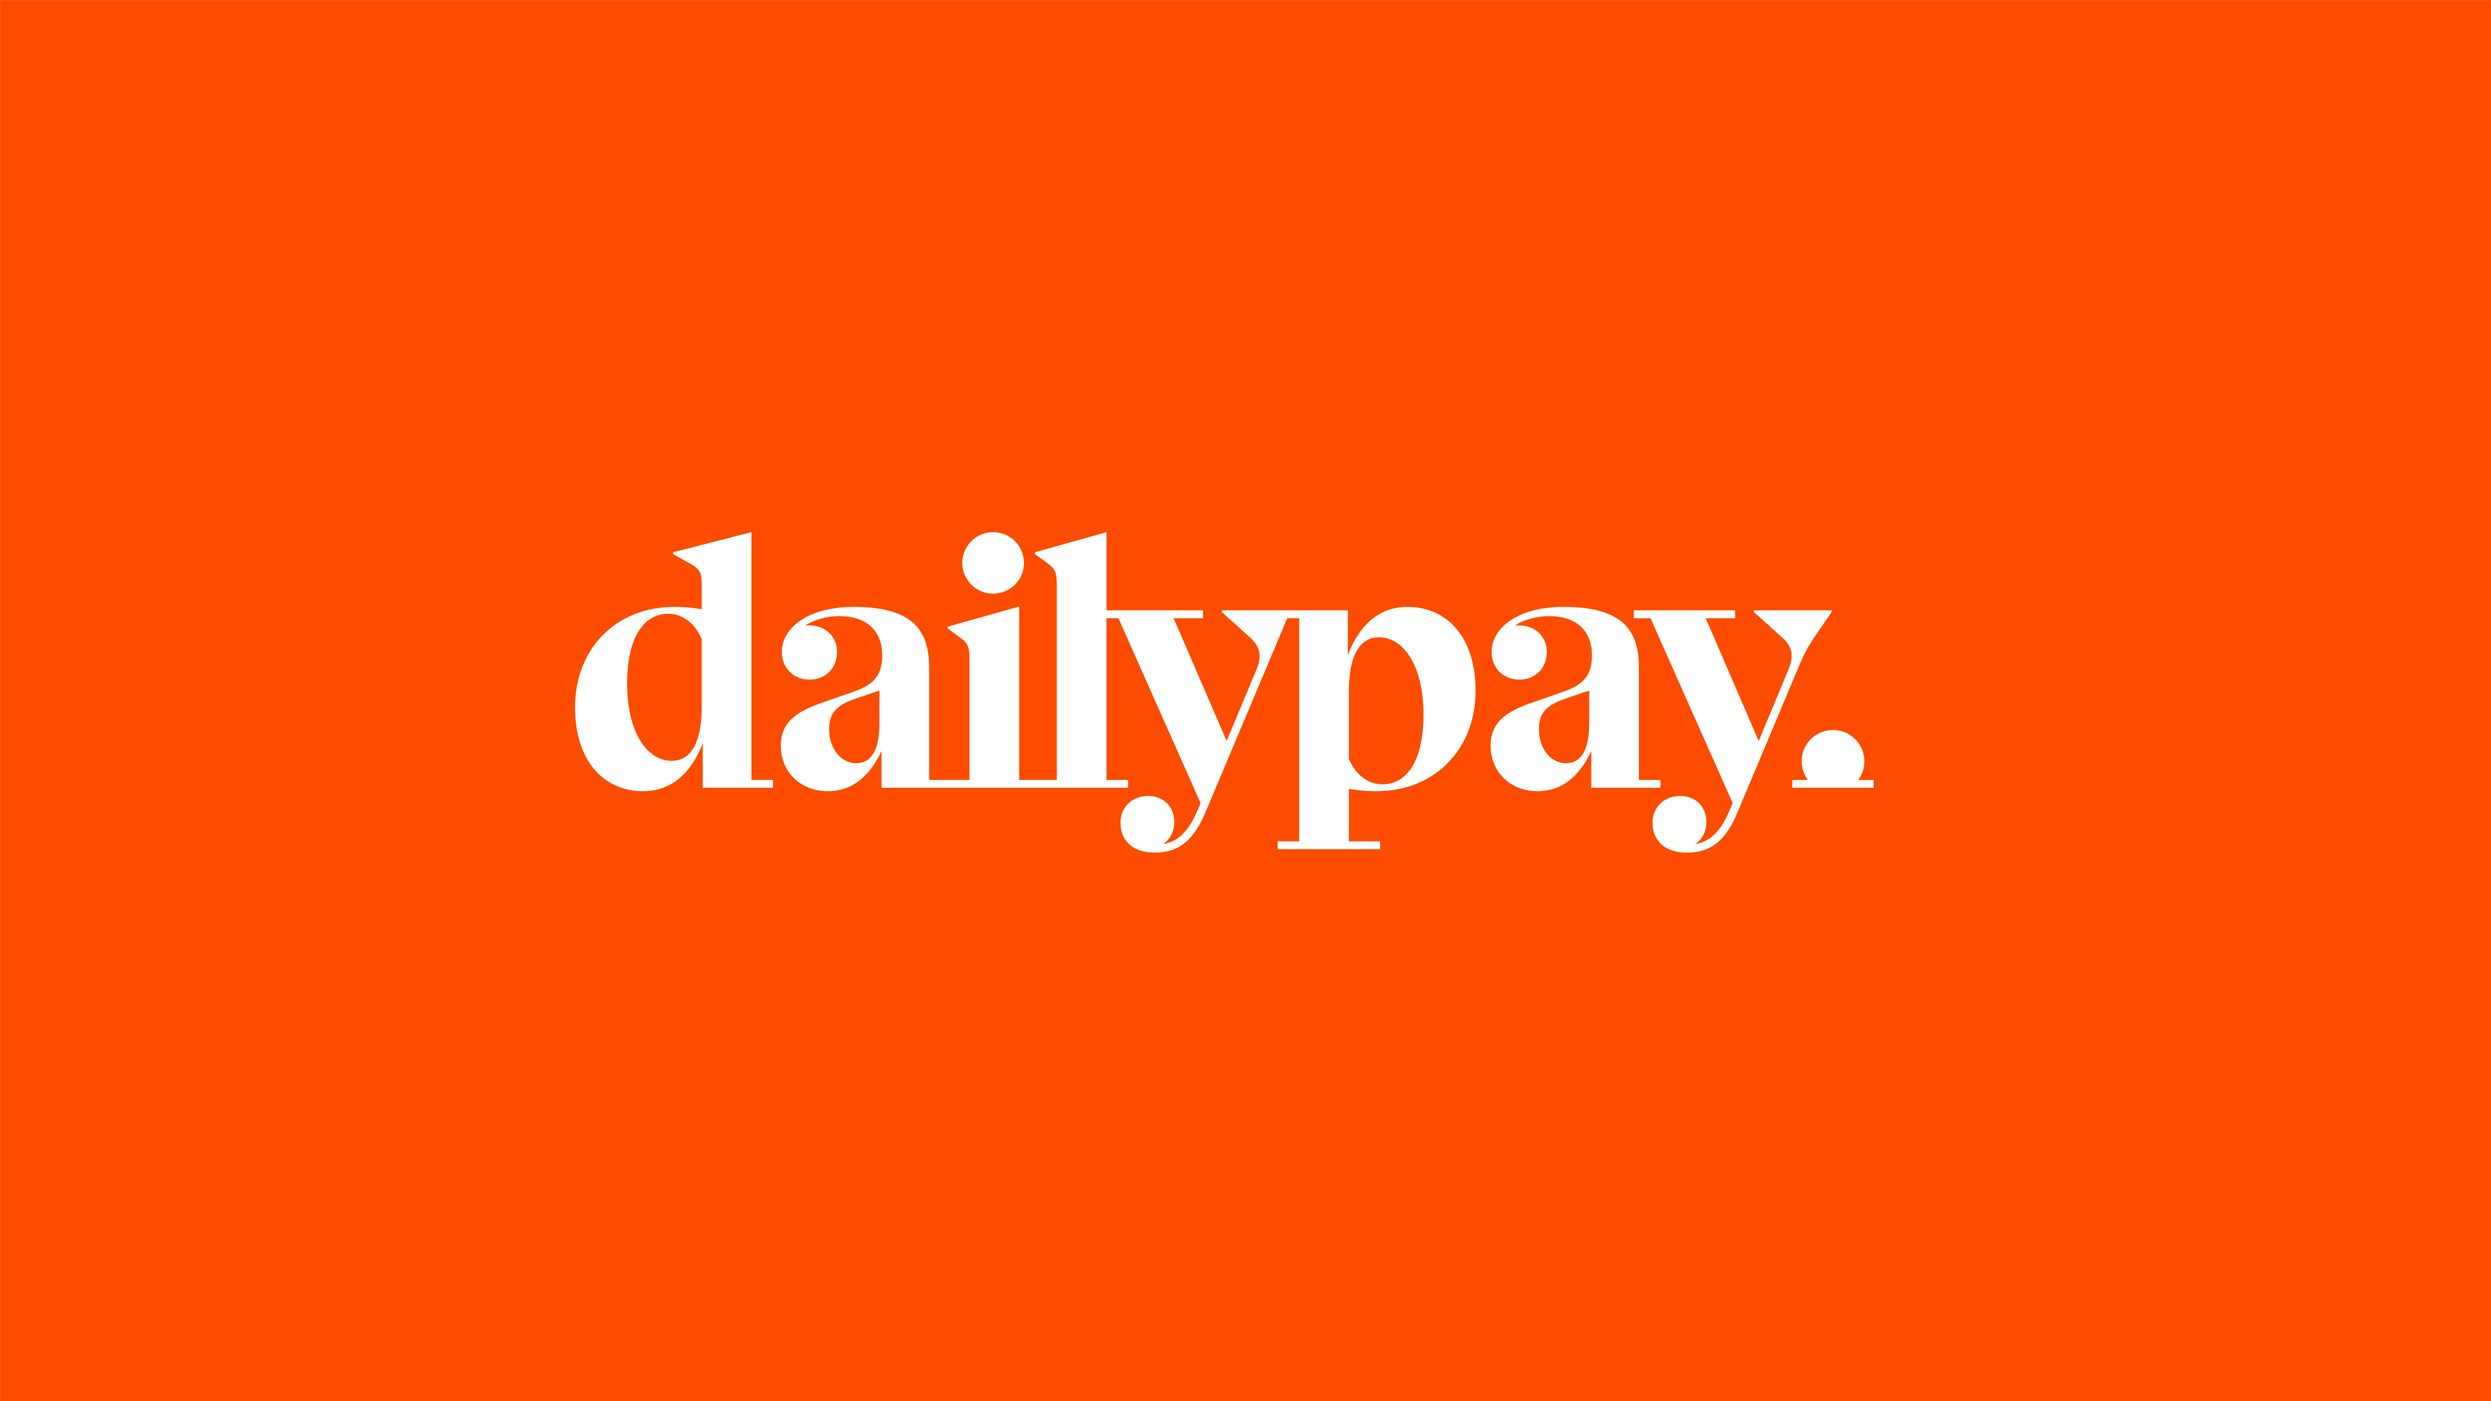 DailyPay logotype against orange background by Wolff Olins